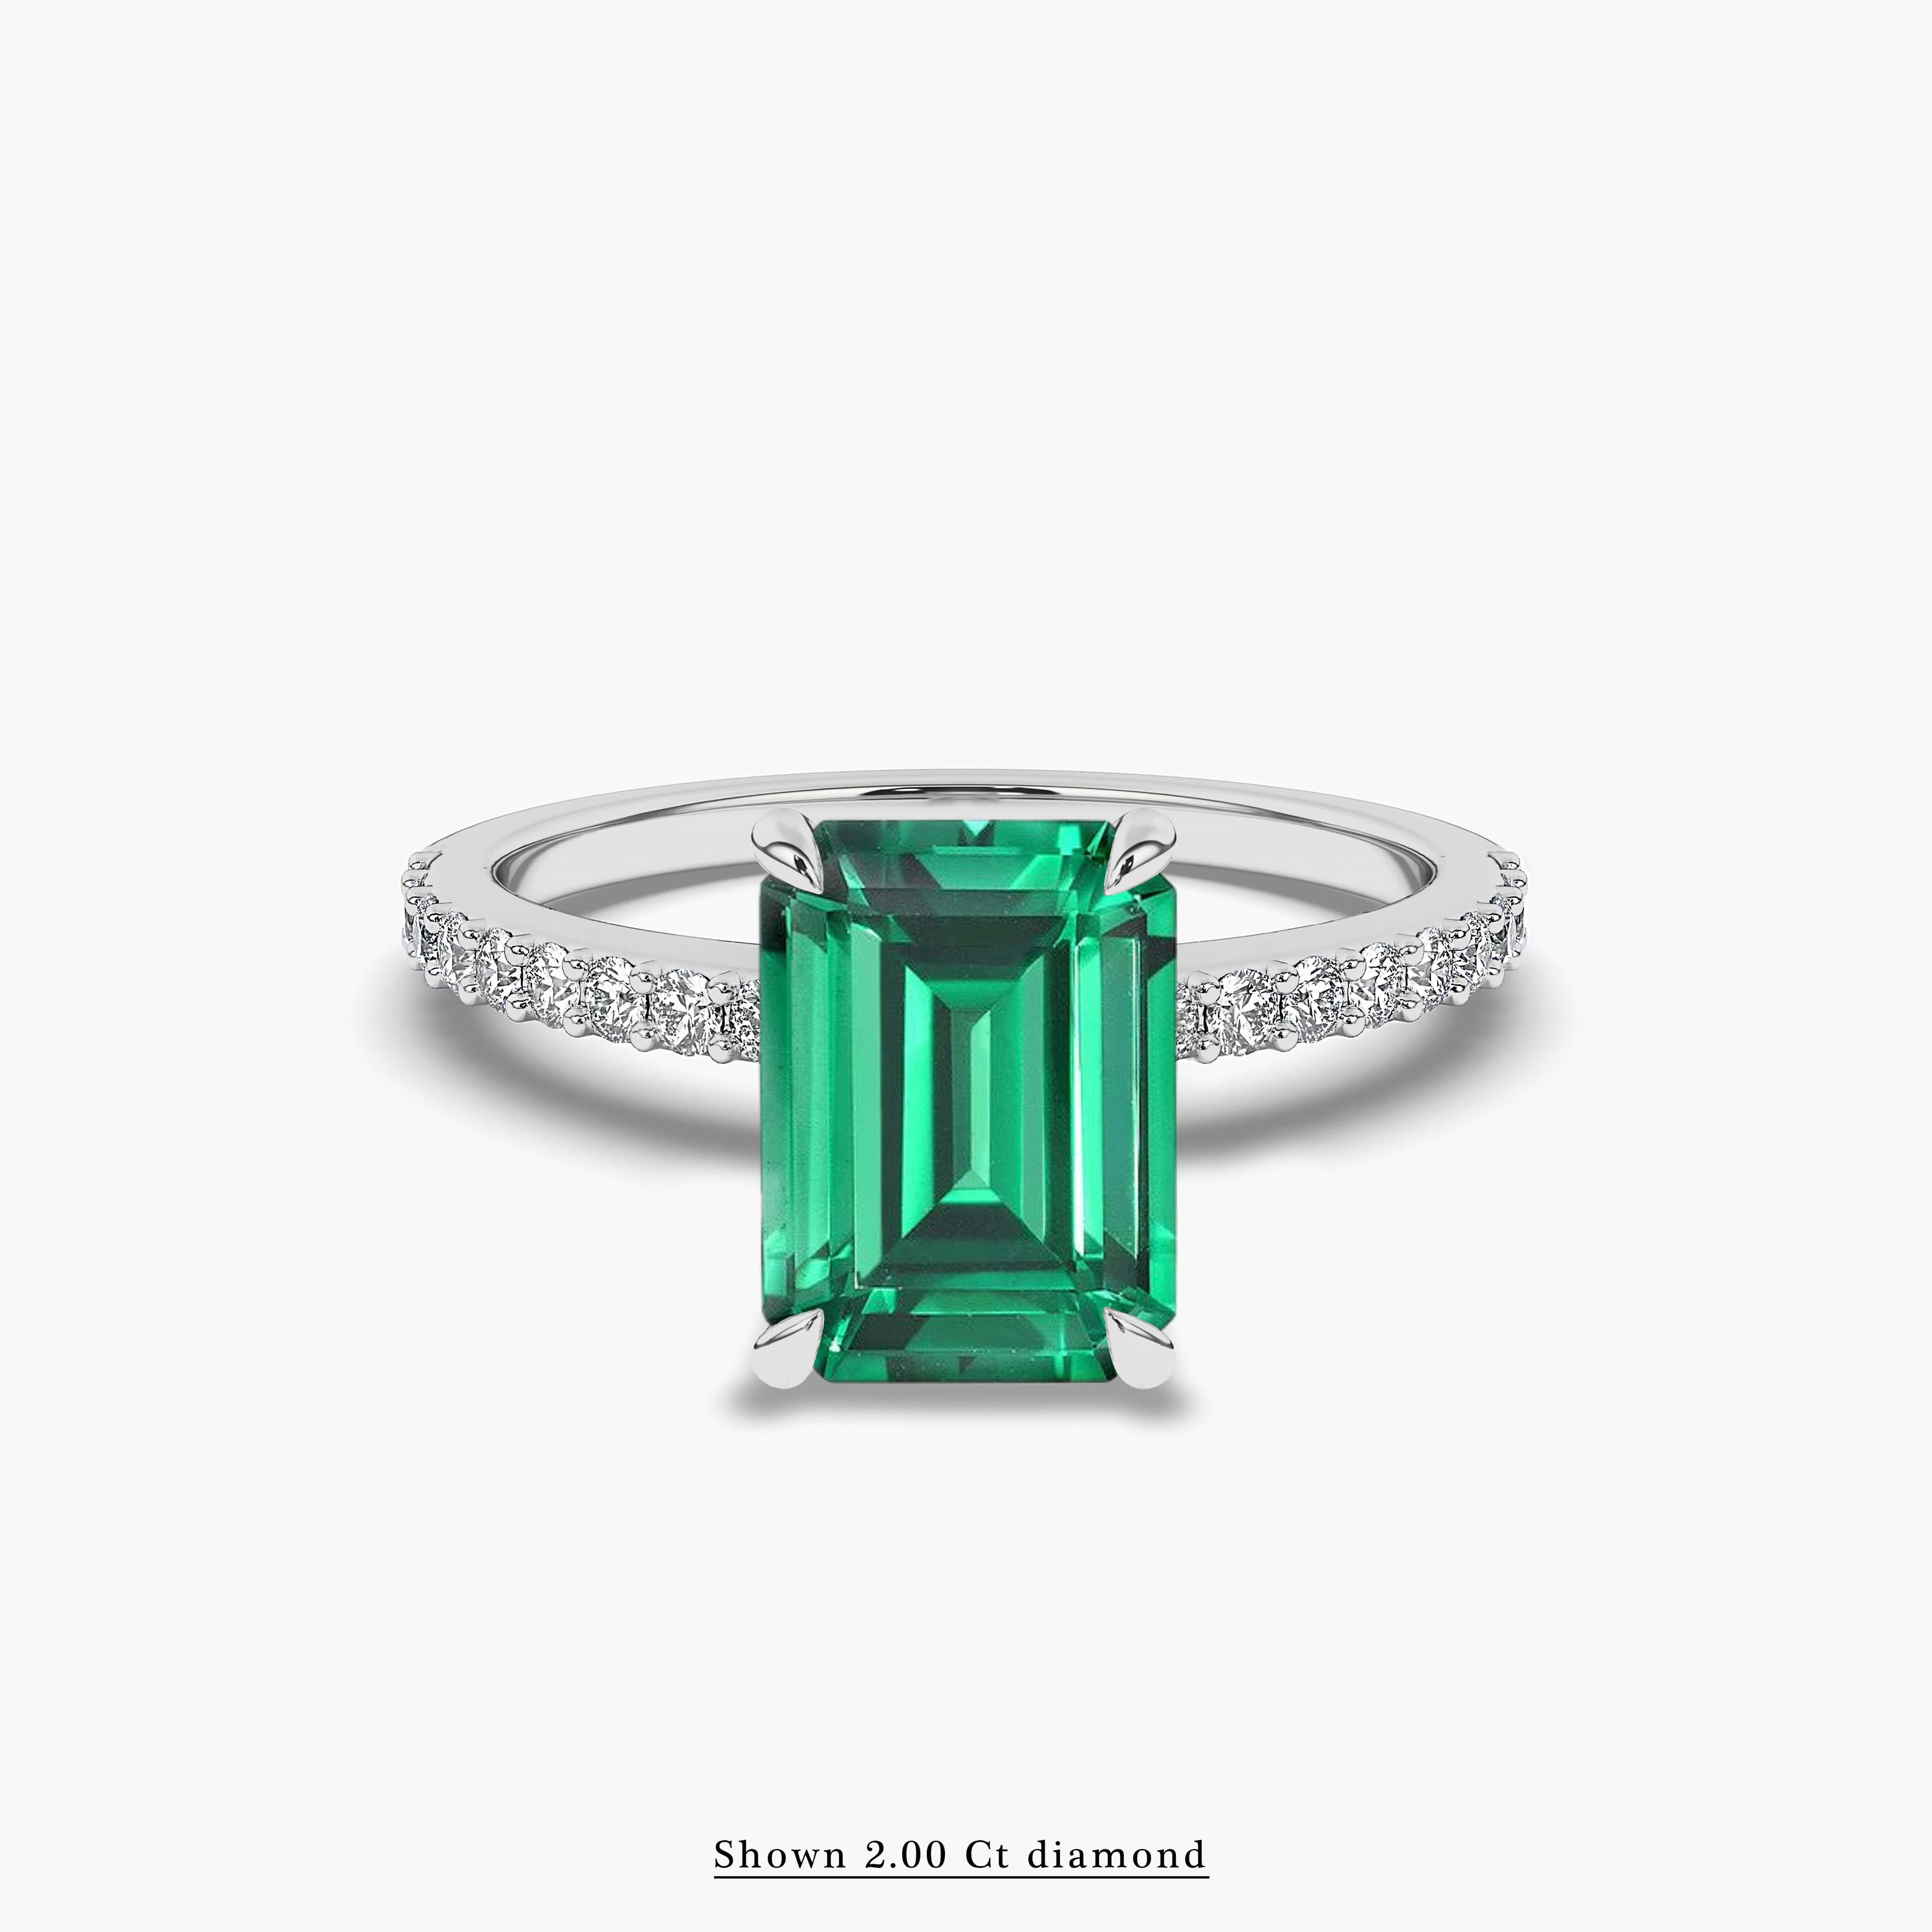 Emerald Engagement Ring in white gold